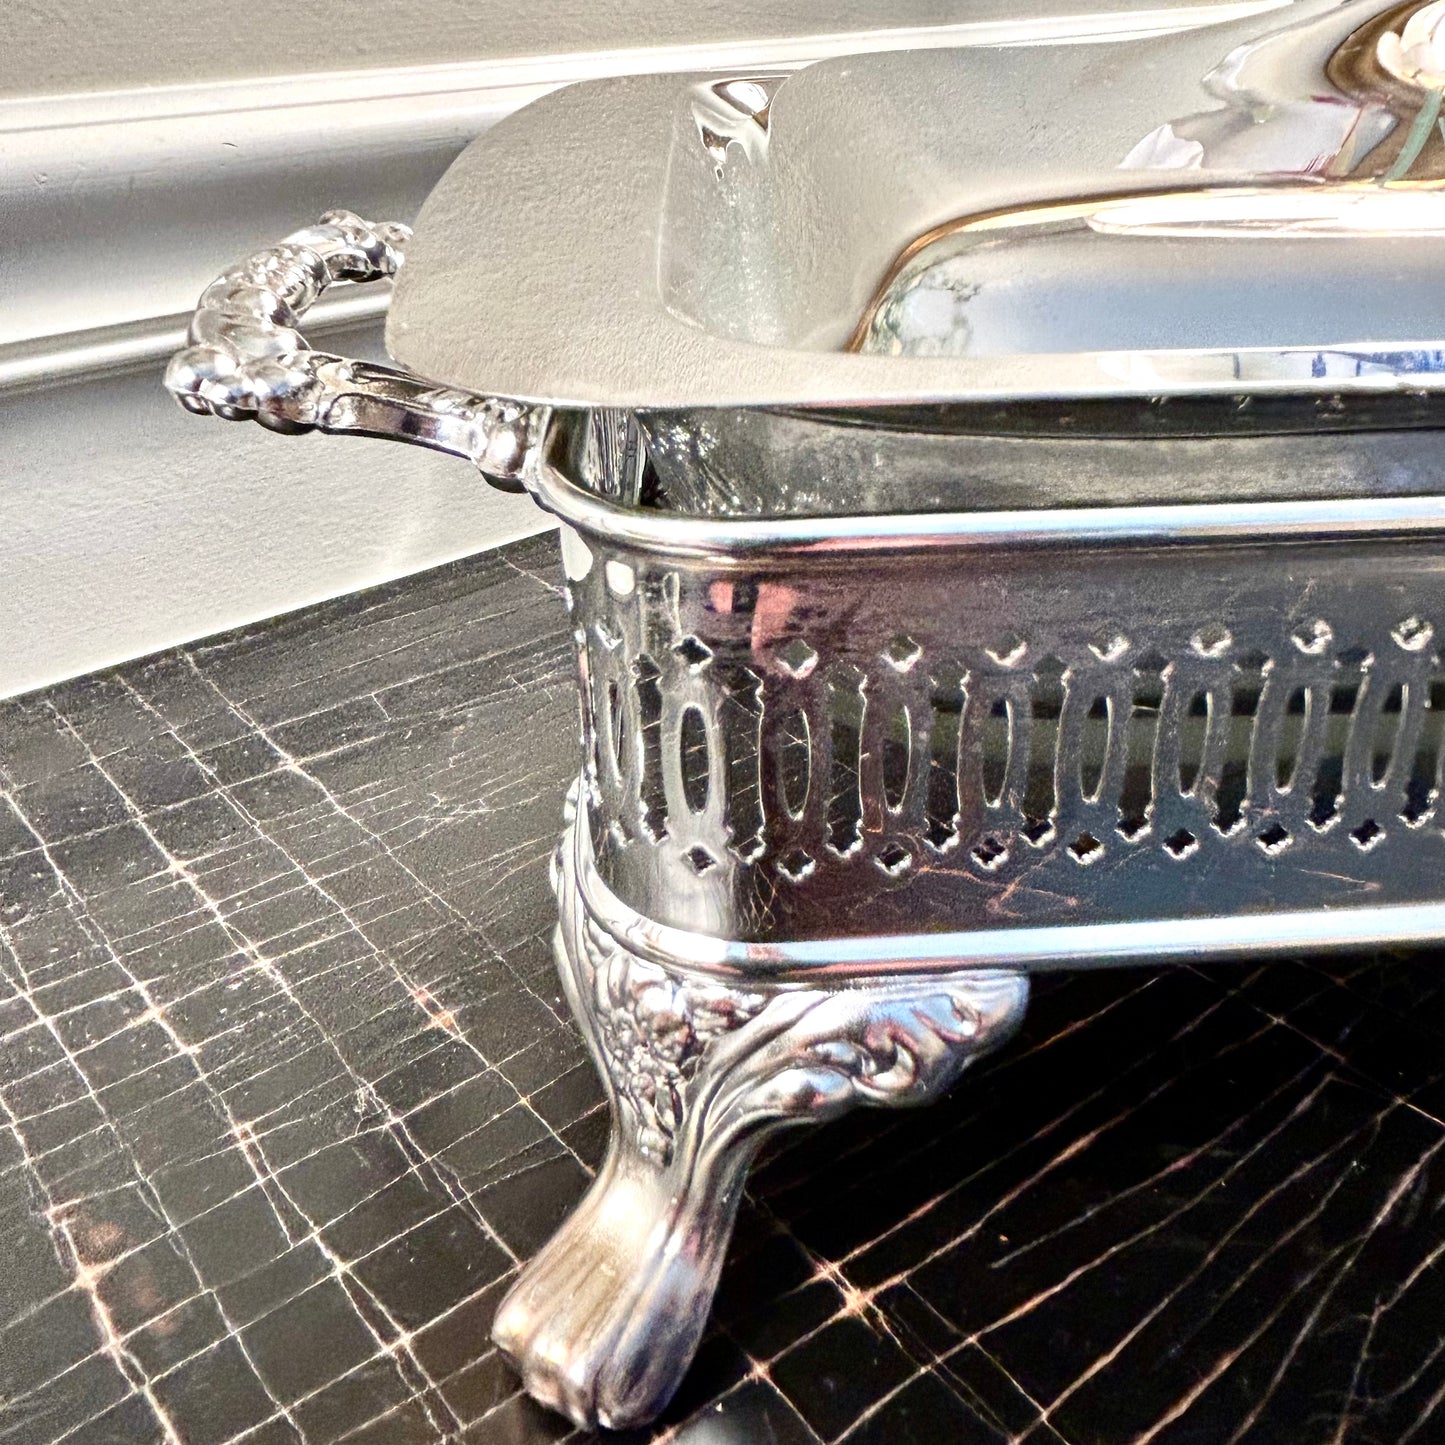 Vintage silver plate chippendale baroque casserole server with glass insert and lid